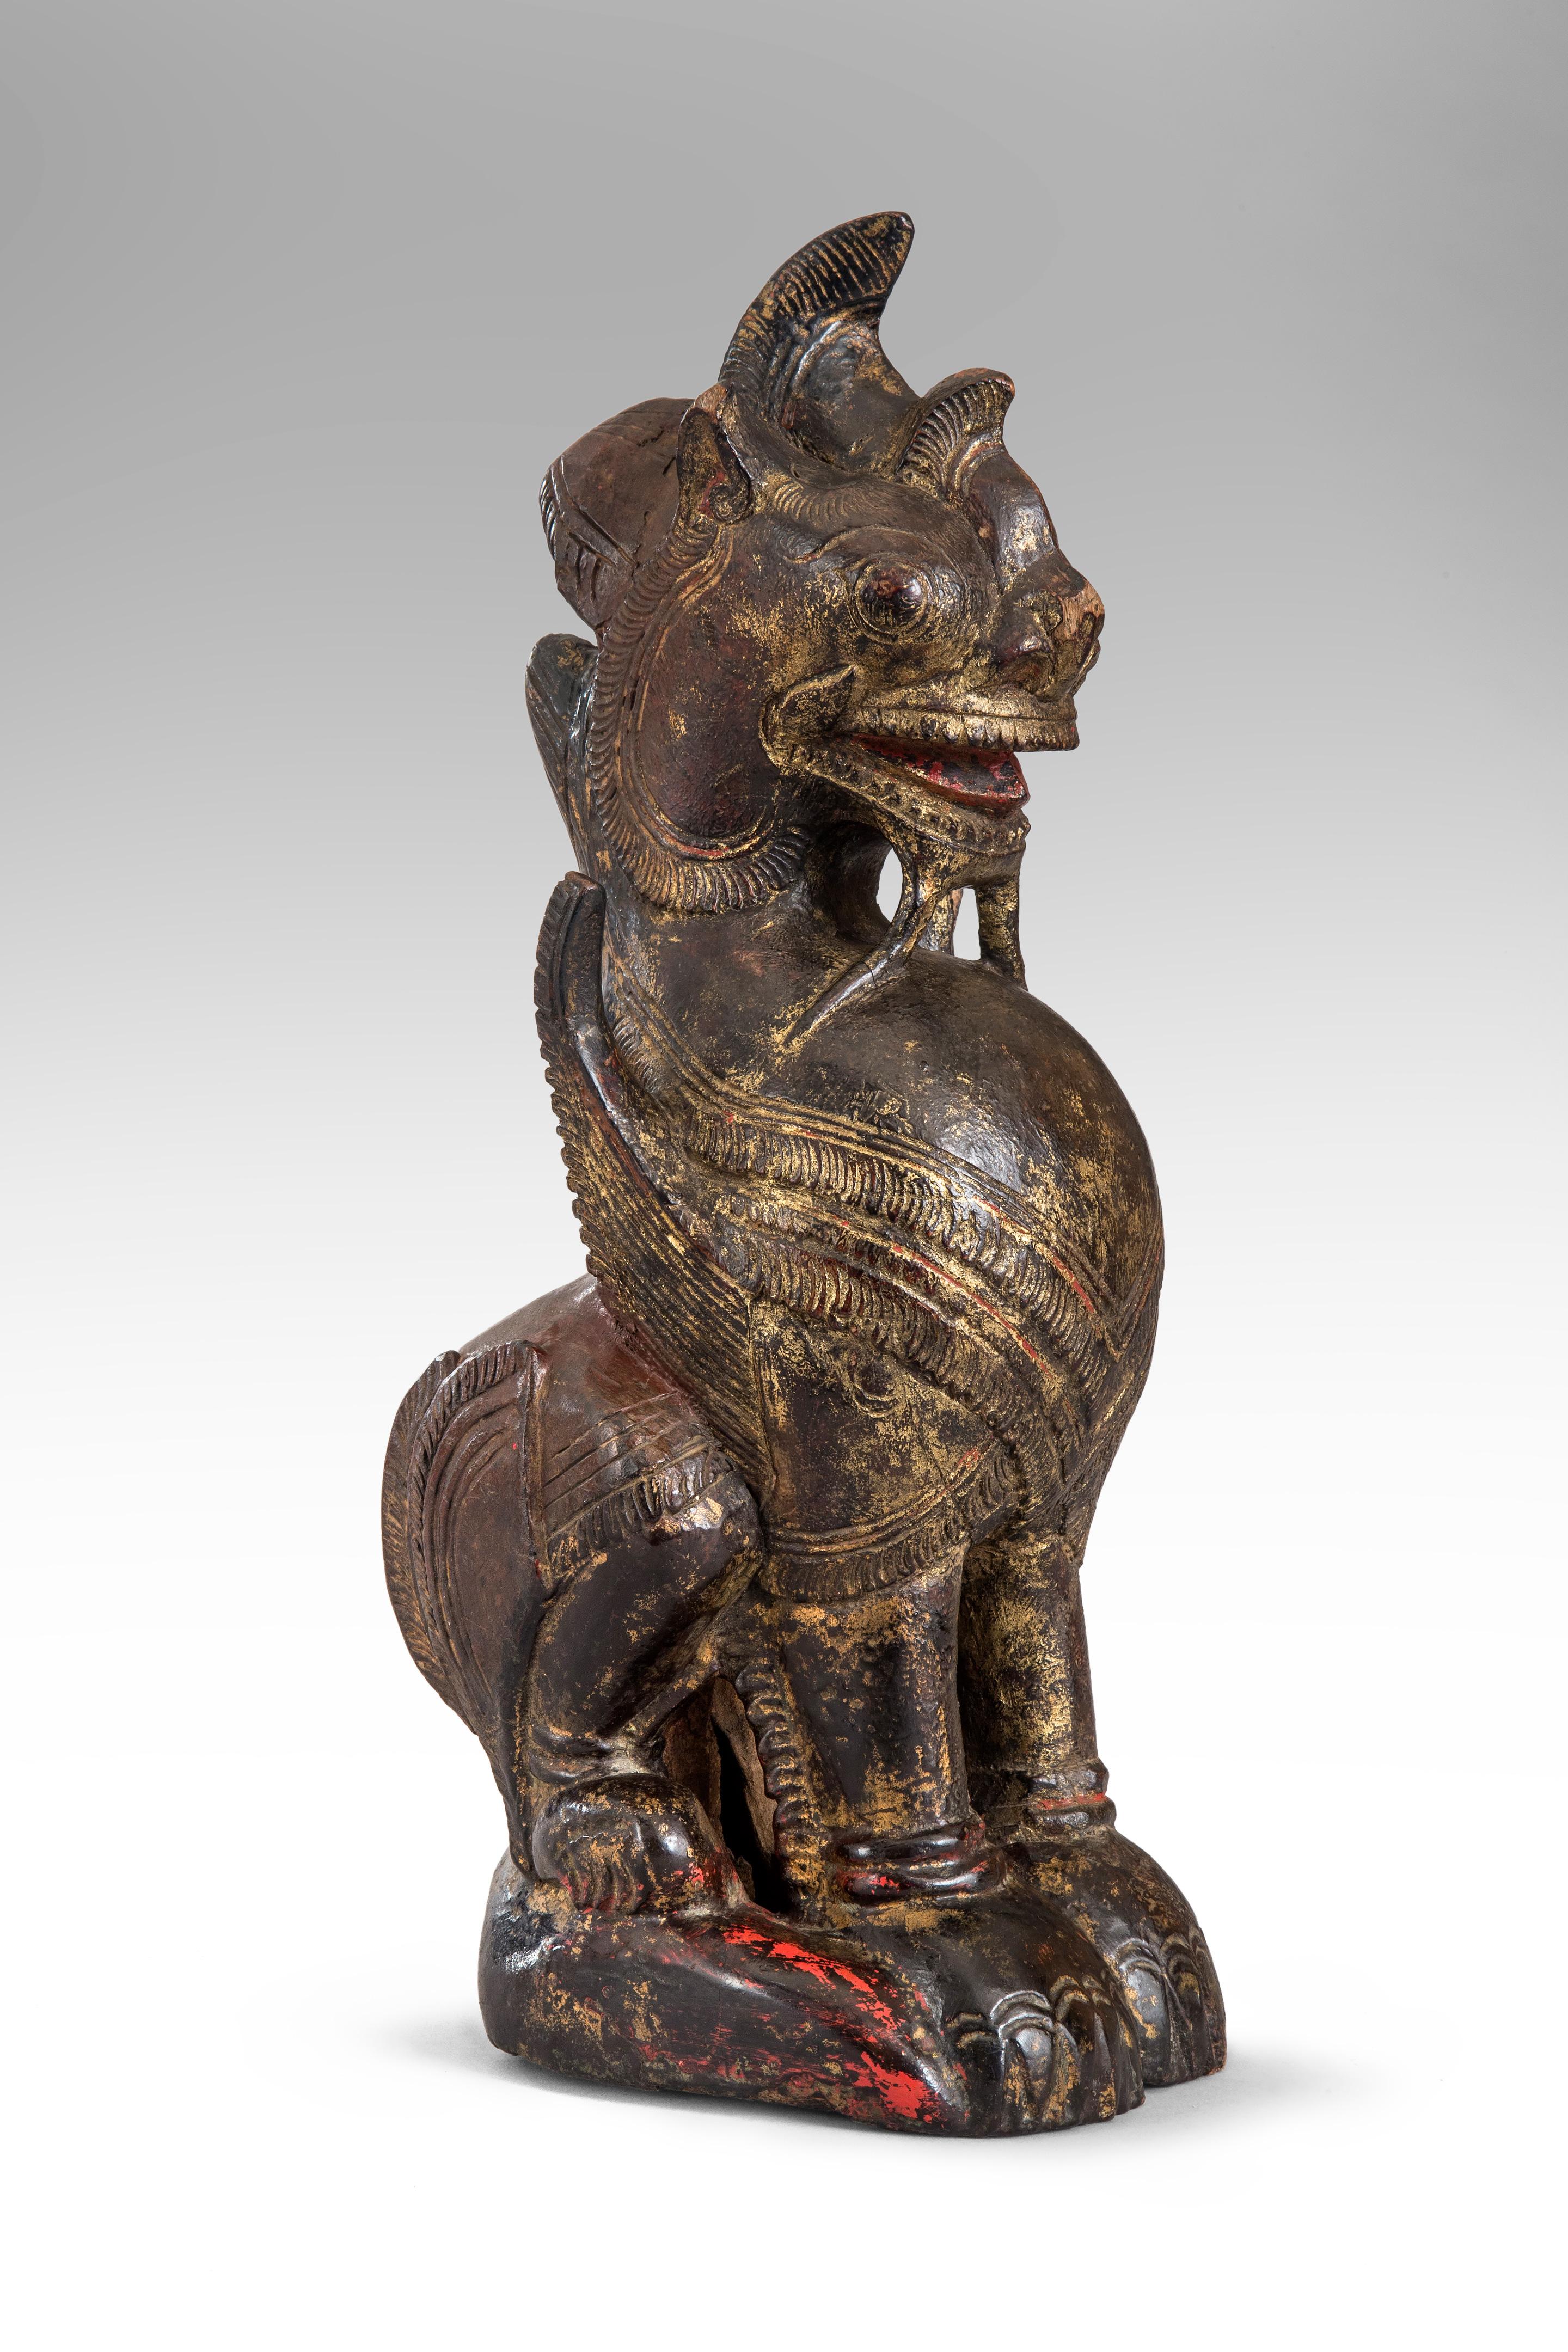 Thai mythological guardian lion sculpture
19th or 20th century.
The well carved winged figure sitting upright with aged black and red paint, traces of gilding. Small part of base missing otherwise in wonderful antique condition. The lion,